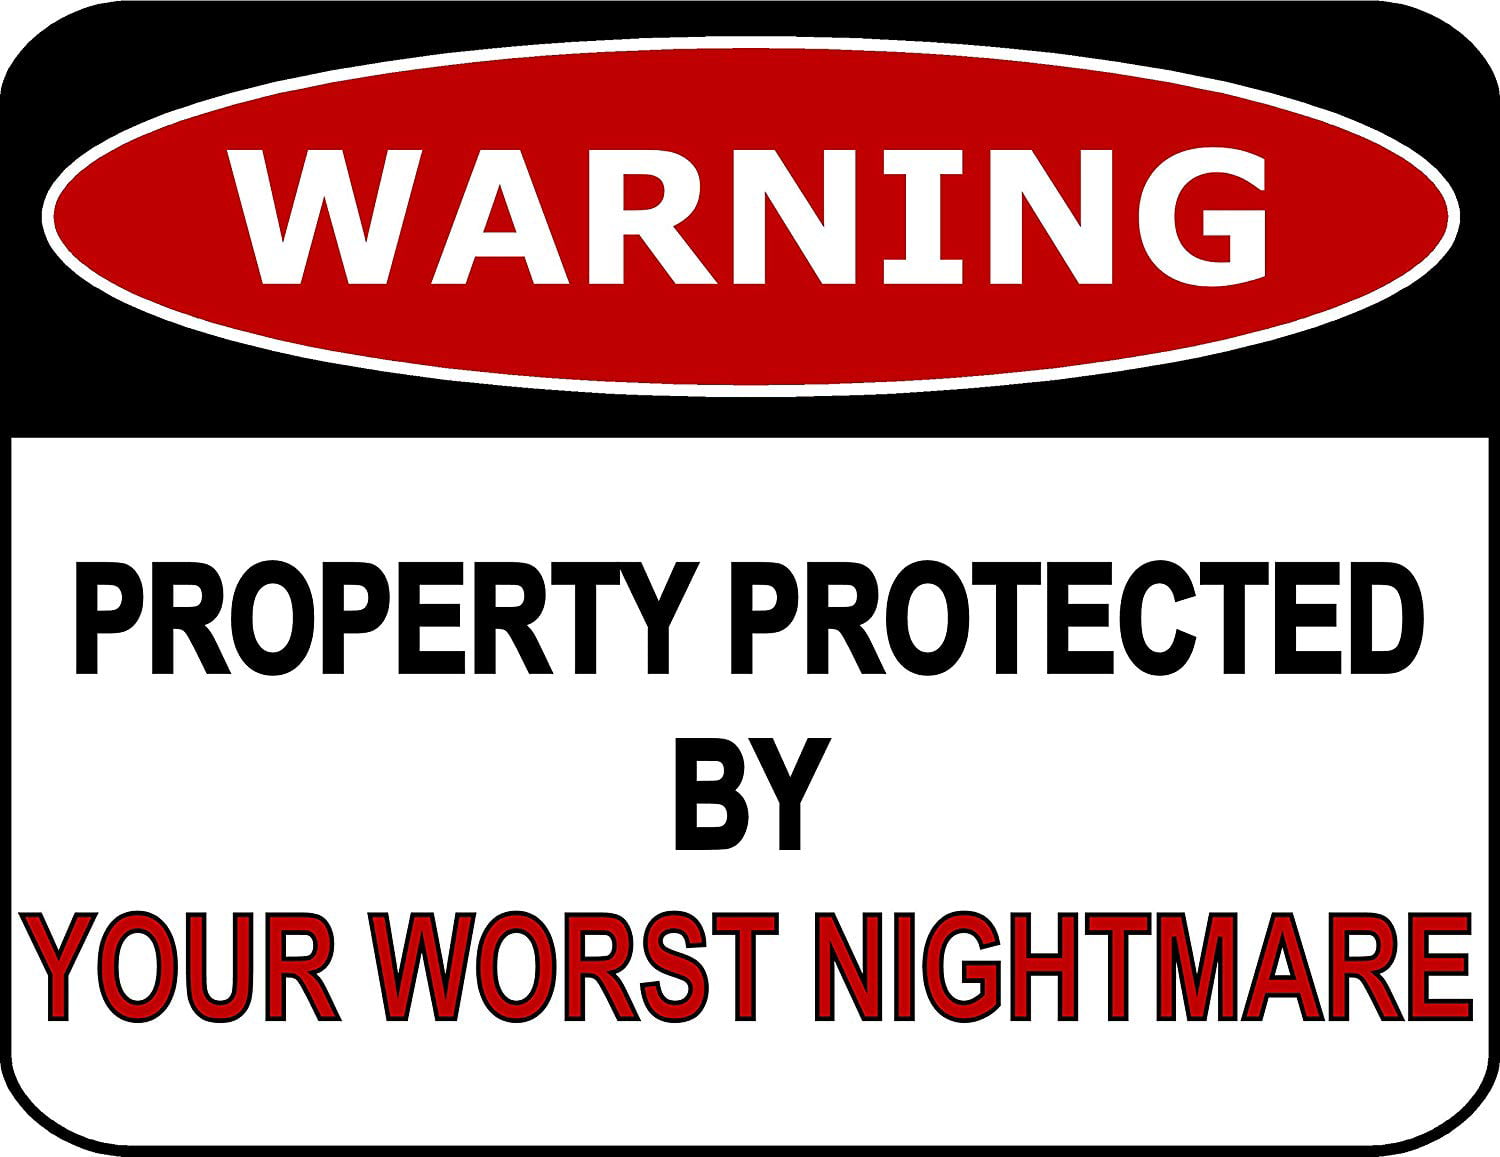 Warning Property Protected By Guinea Pig Metal Sign Makes a Funny Room Decor